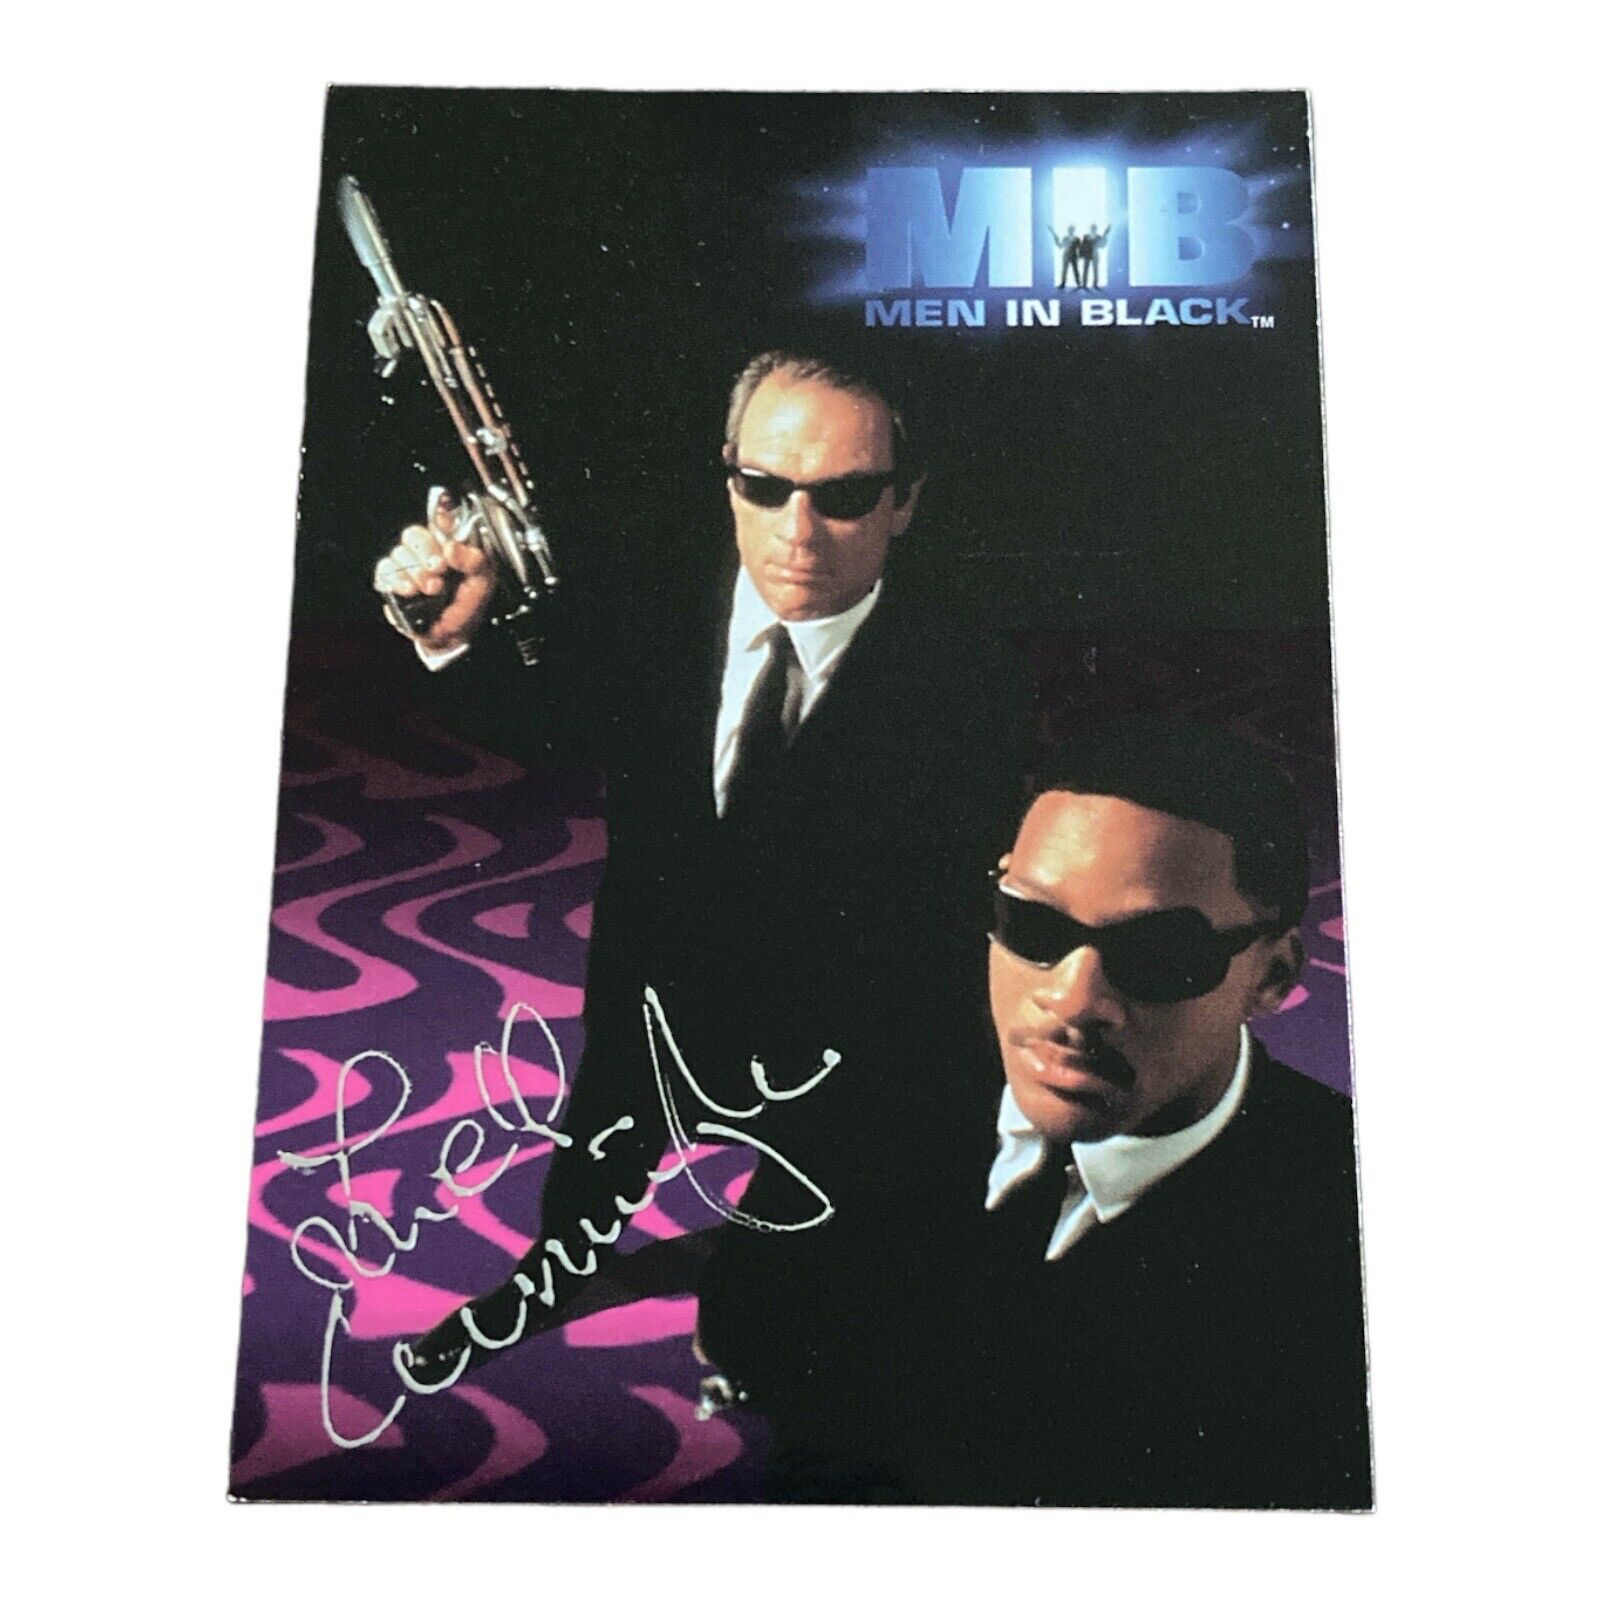 MEN IN BLACK INKWORKS 1997 Pack-Pulled AUTOGRAPH PROMO CARD by LOWELL CUNNINGHAM